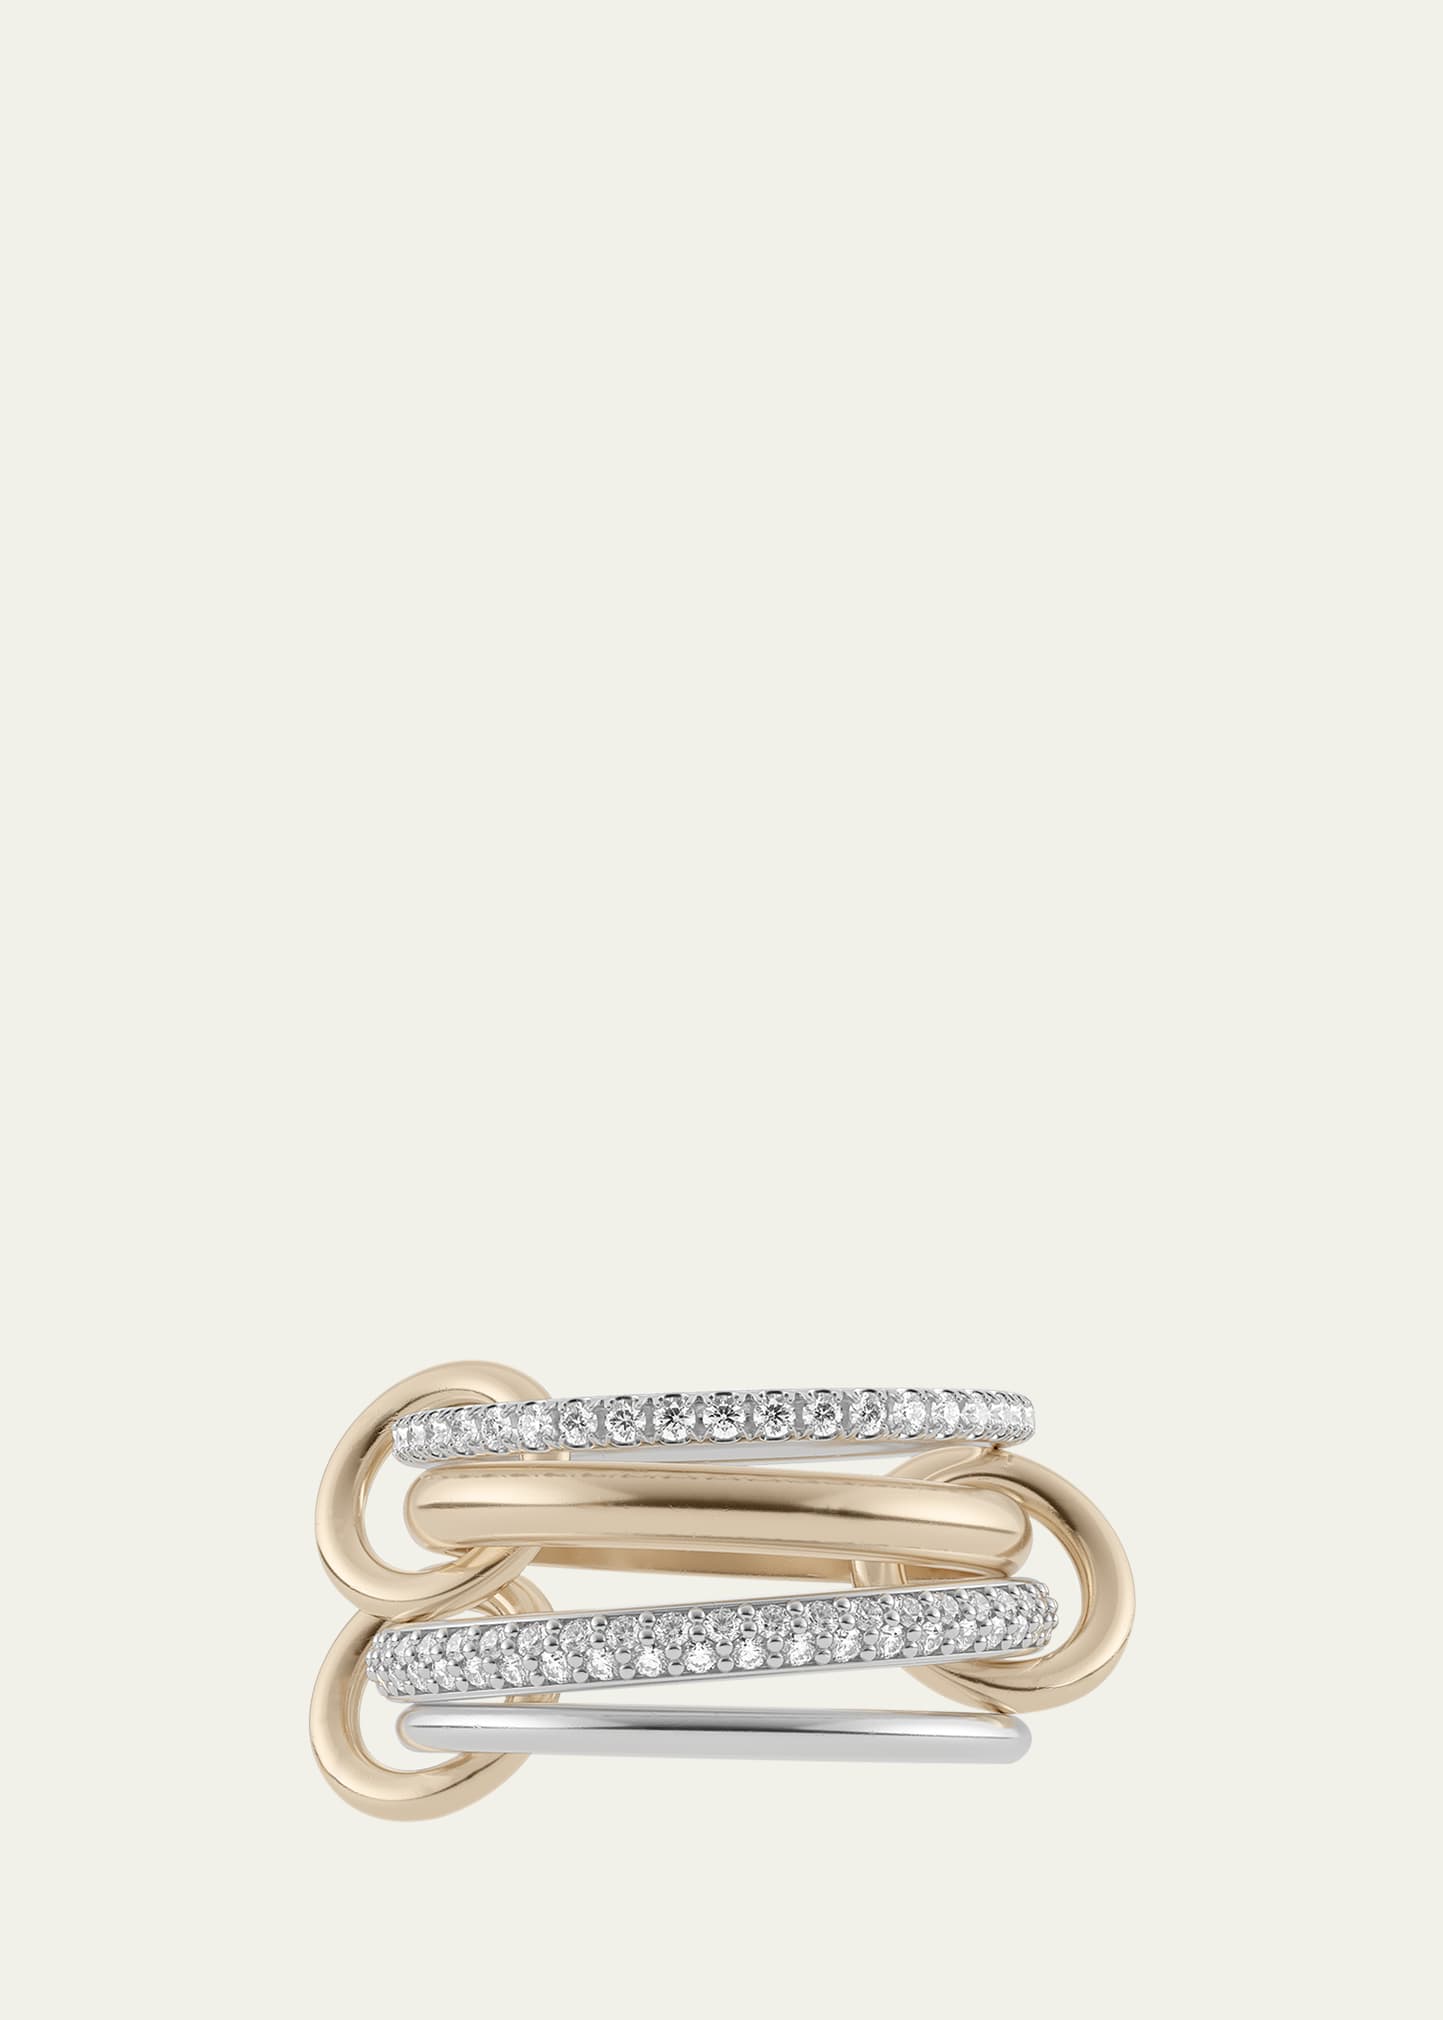 Vega Blanc Petite Four Link Ring in Sterling Silver and 18K Yellow Gold with U Pave White Diamonds